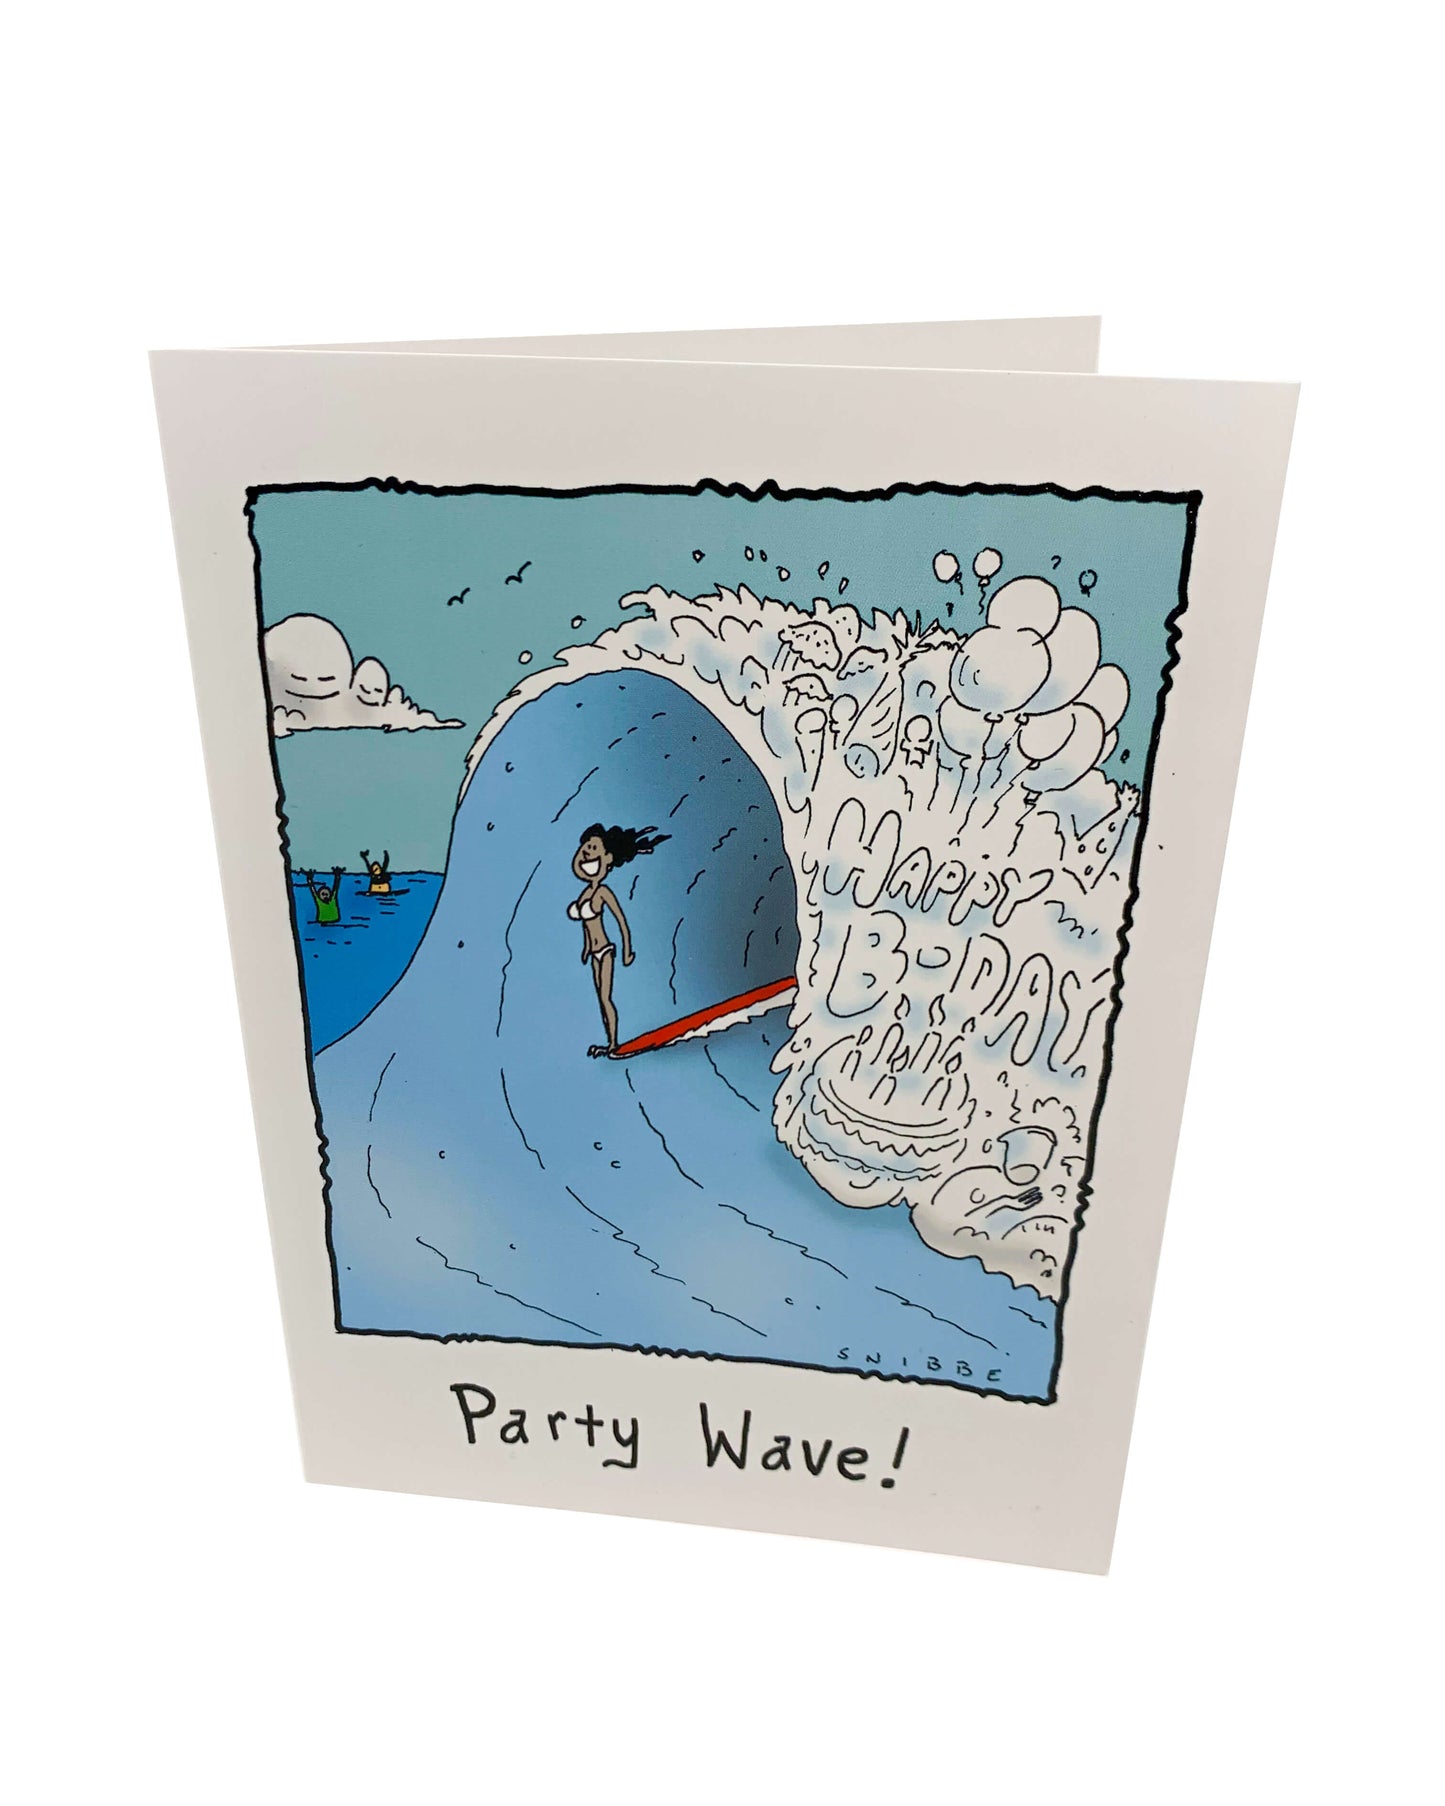 Party Wave! - Birthday Card